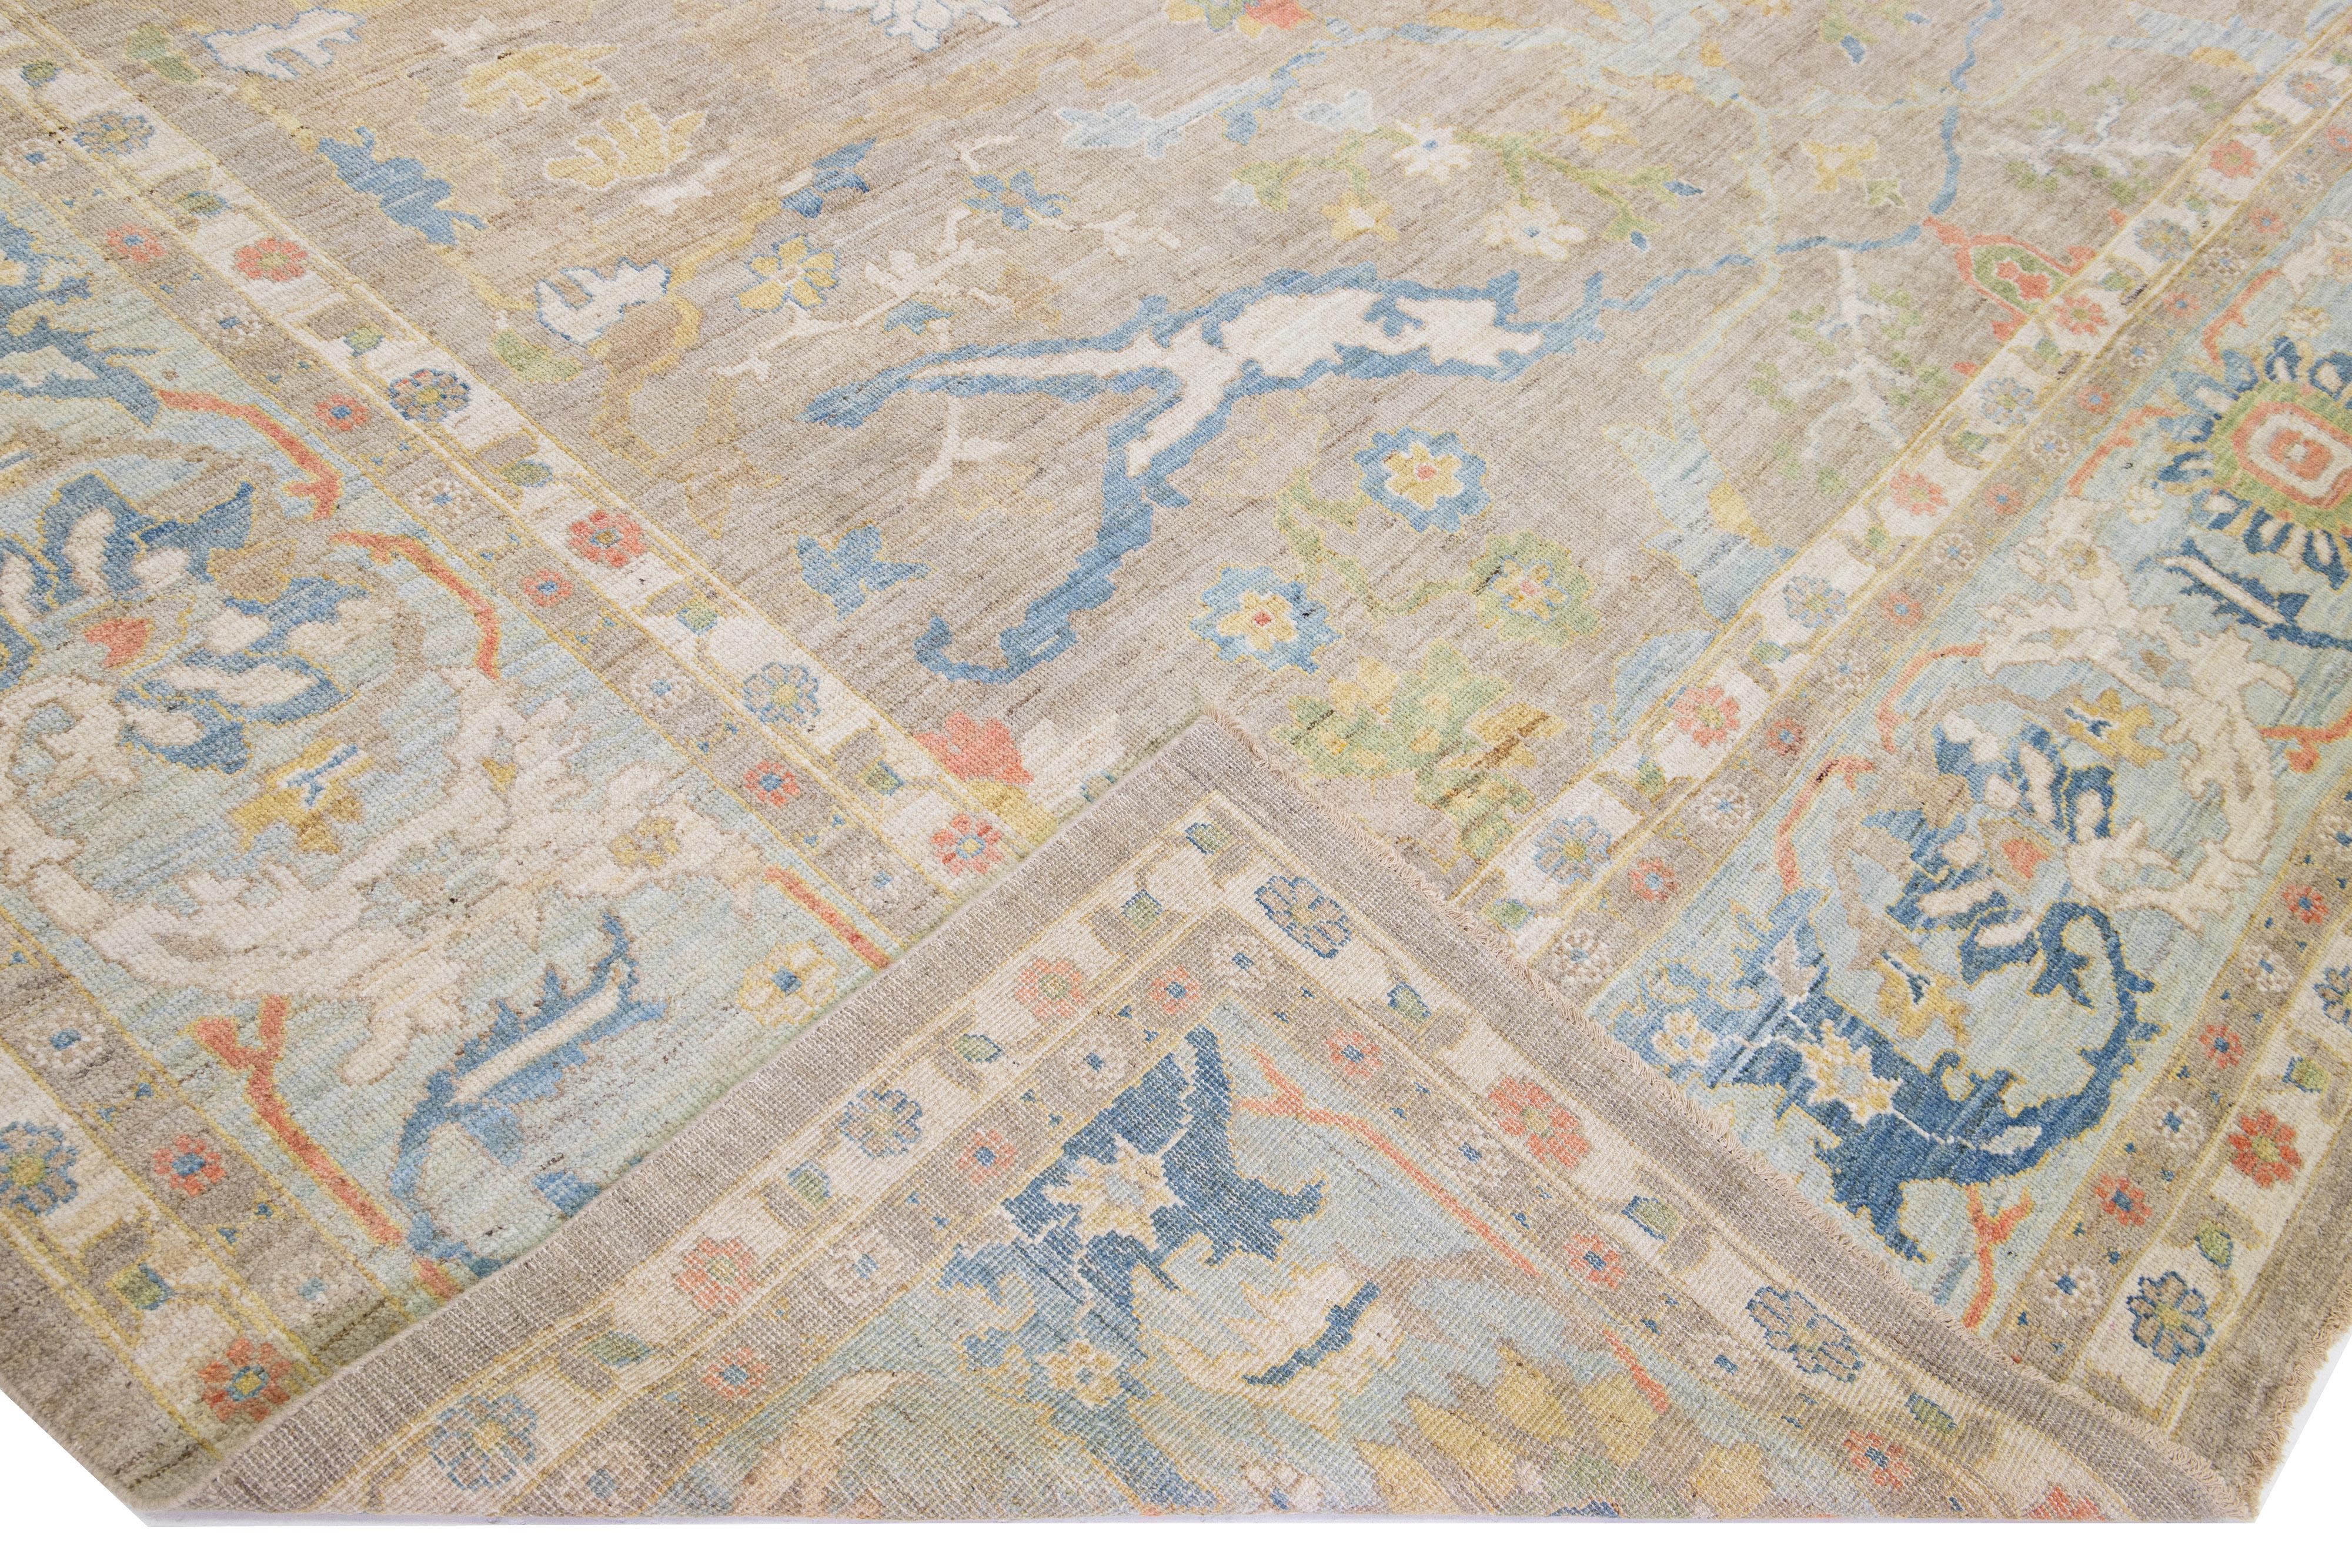 Beautiful modern Sultanabad hand-knotted oversize wool rug with a brown color field. This rug has a blue frame with multicolor accents in a gorgeous all-over floral design.

This rug measures: 14'8